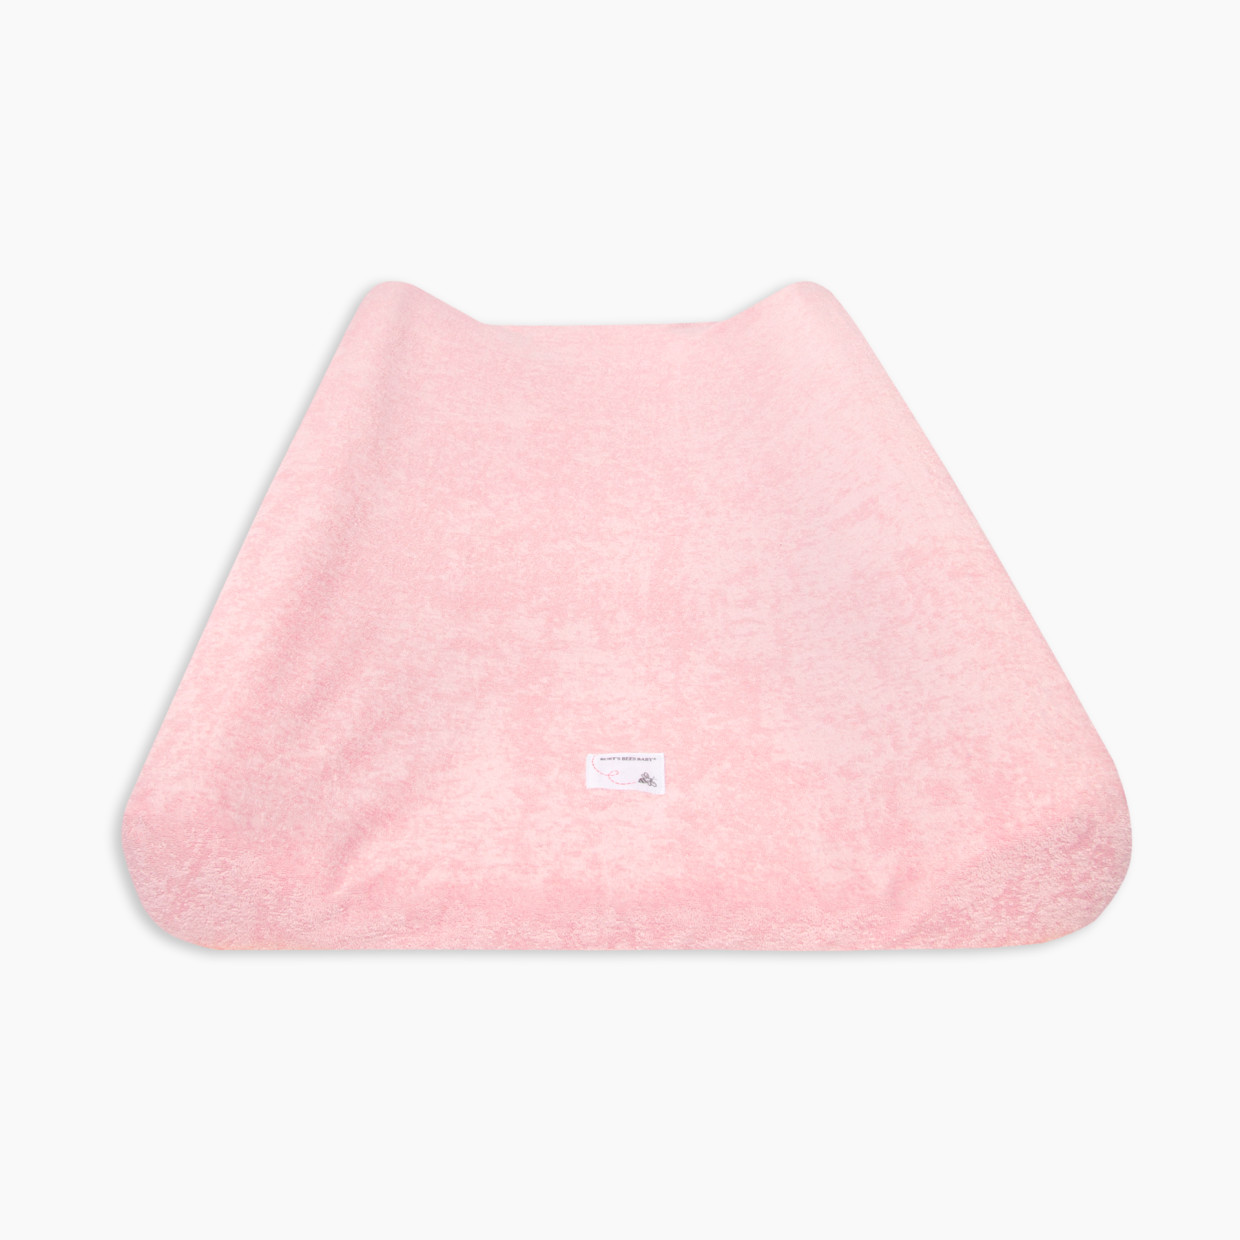 Burt's Bees Baby Knit Terry Organic Fitted Changing Pad Cover - Blossom.